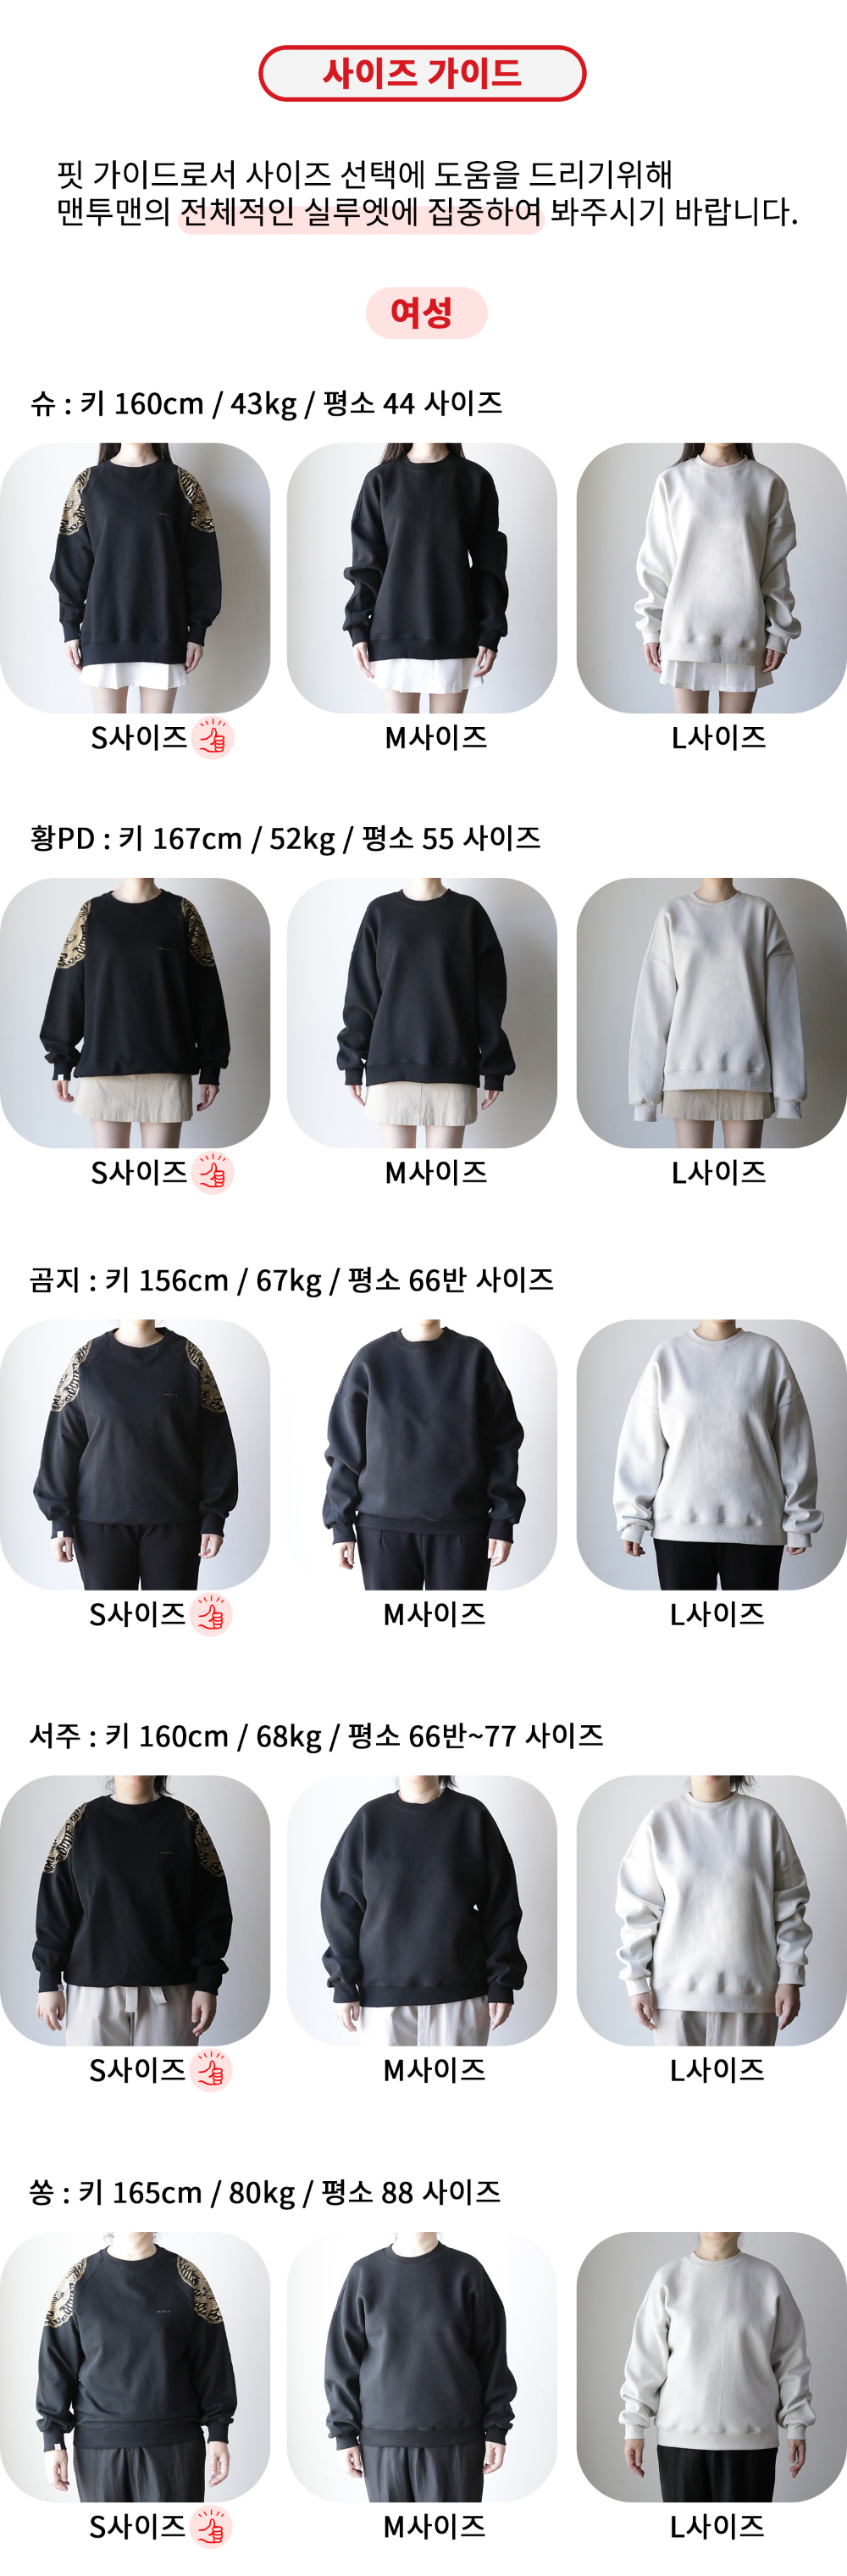 long sleeved tee product image-S79L1